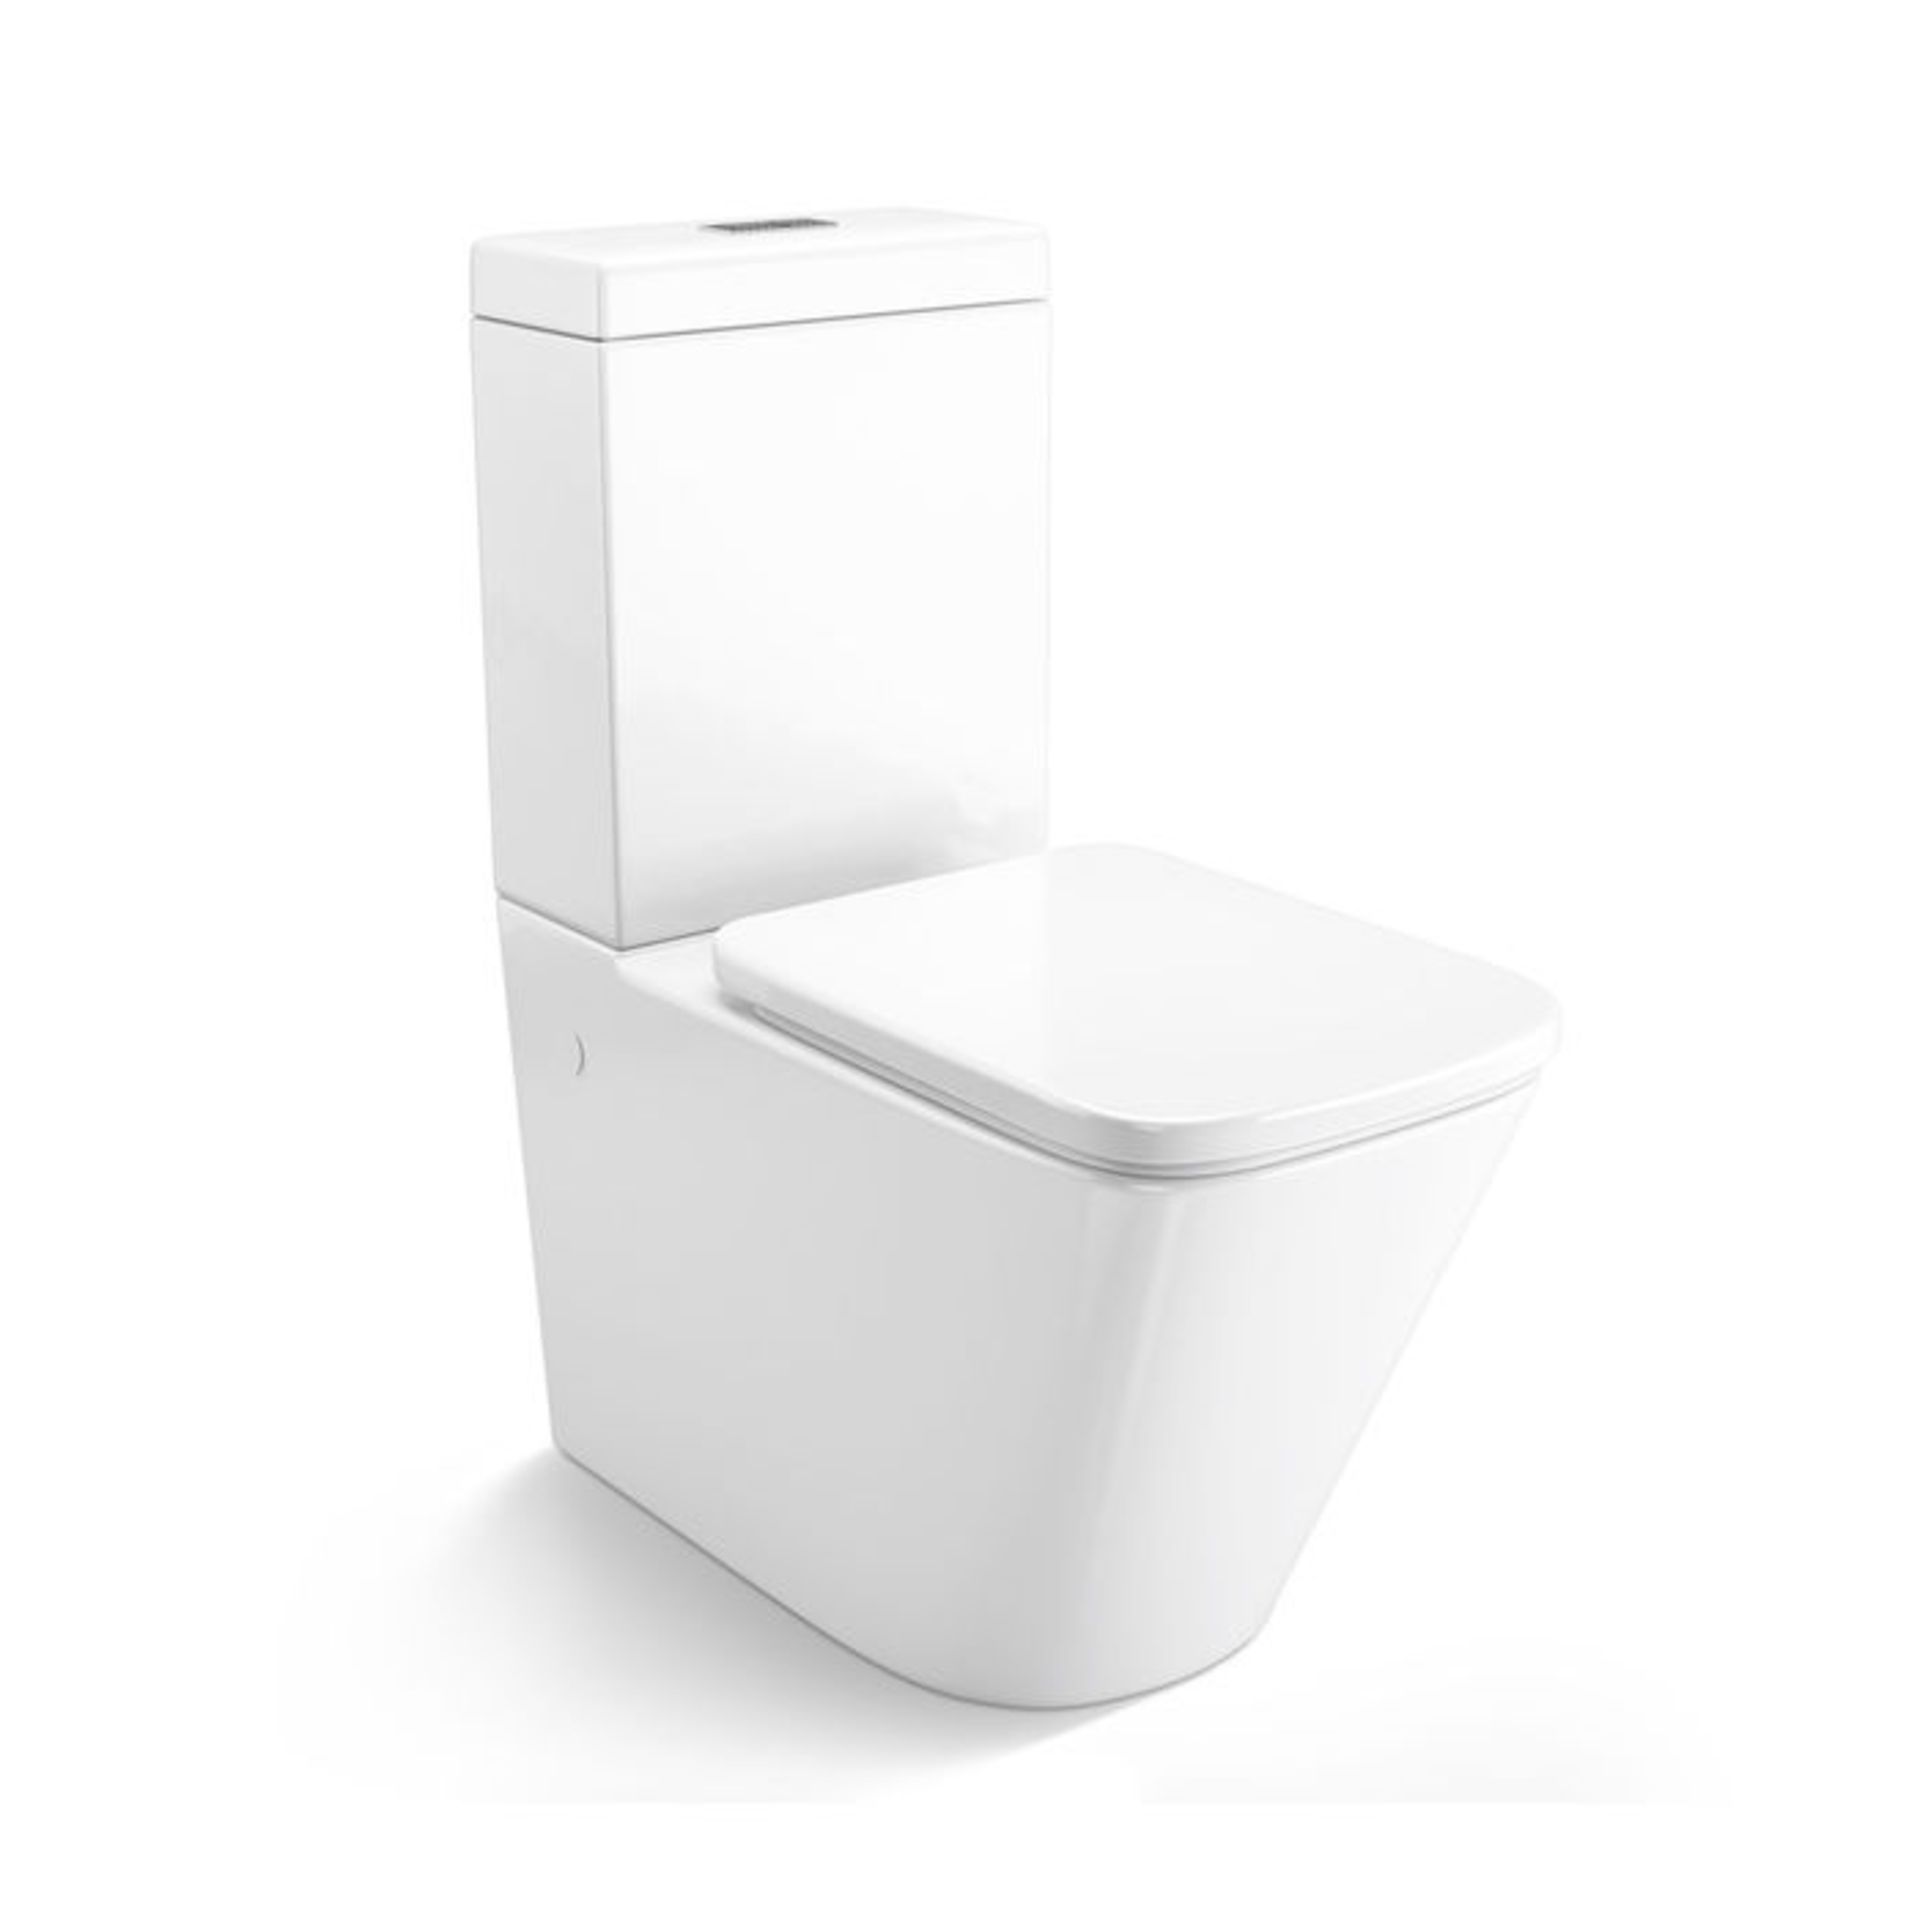 (P254) Florence Close Coupled Toilet & Cistern inc Soft Close Seat. Contemporary design finished - Image 3 of 5